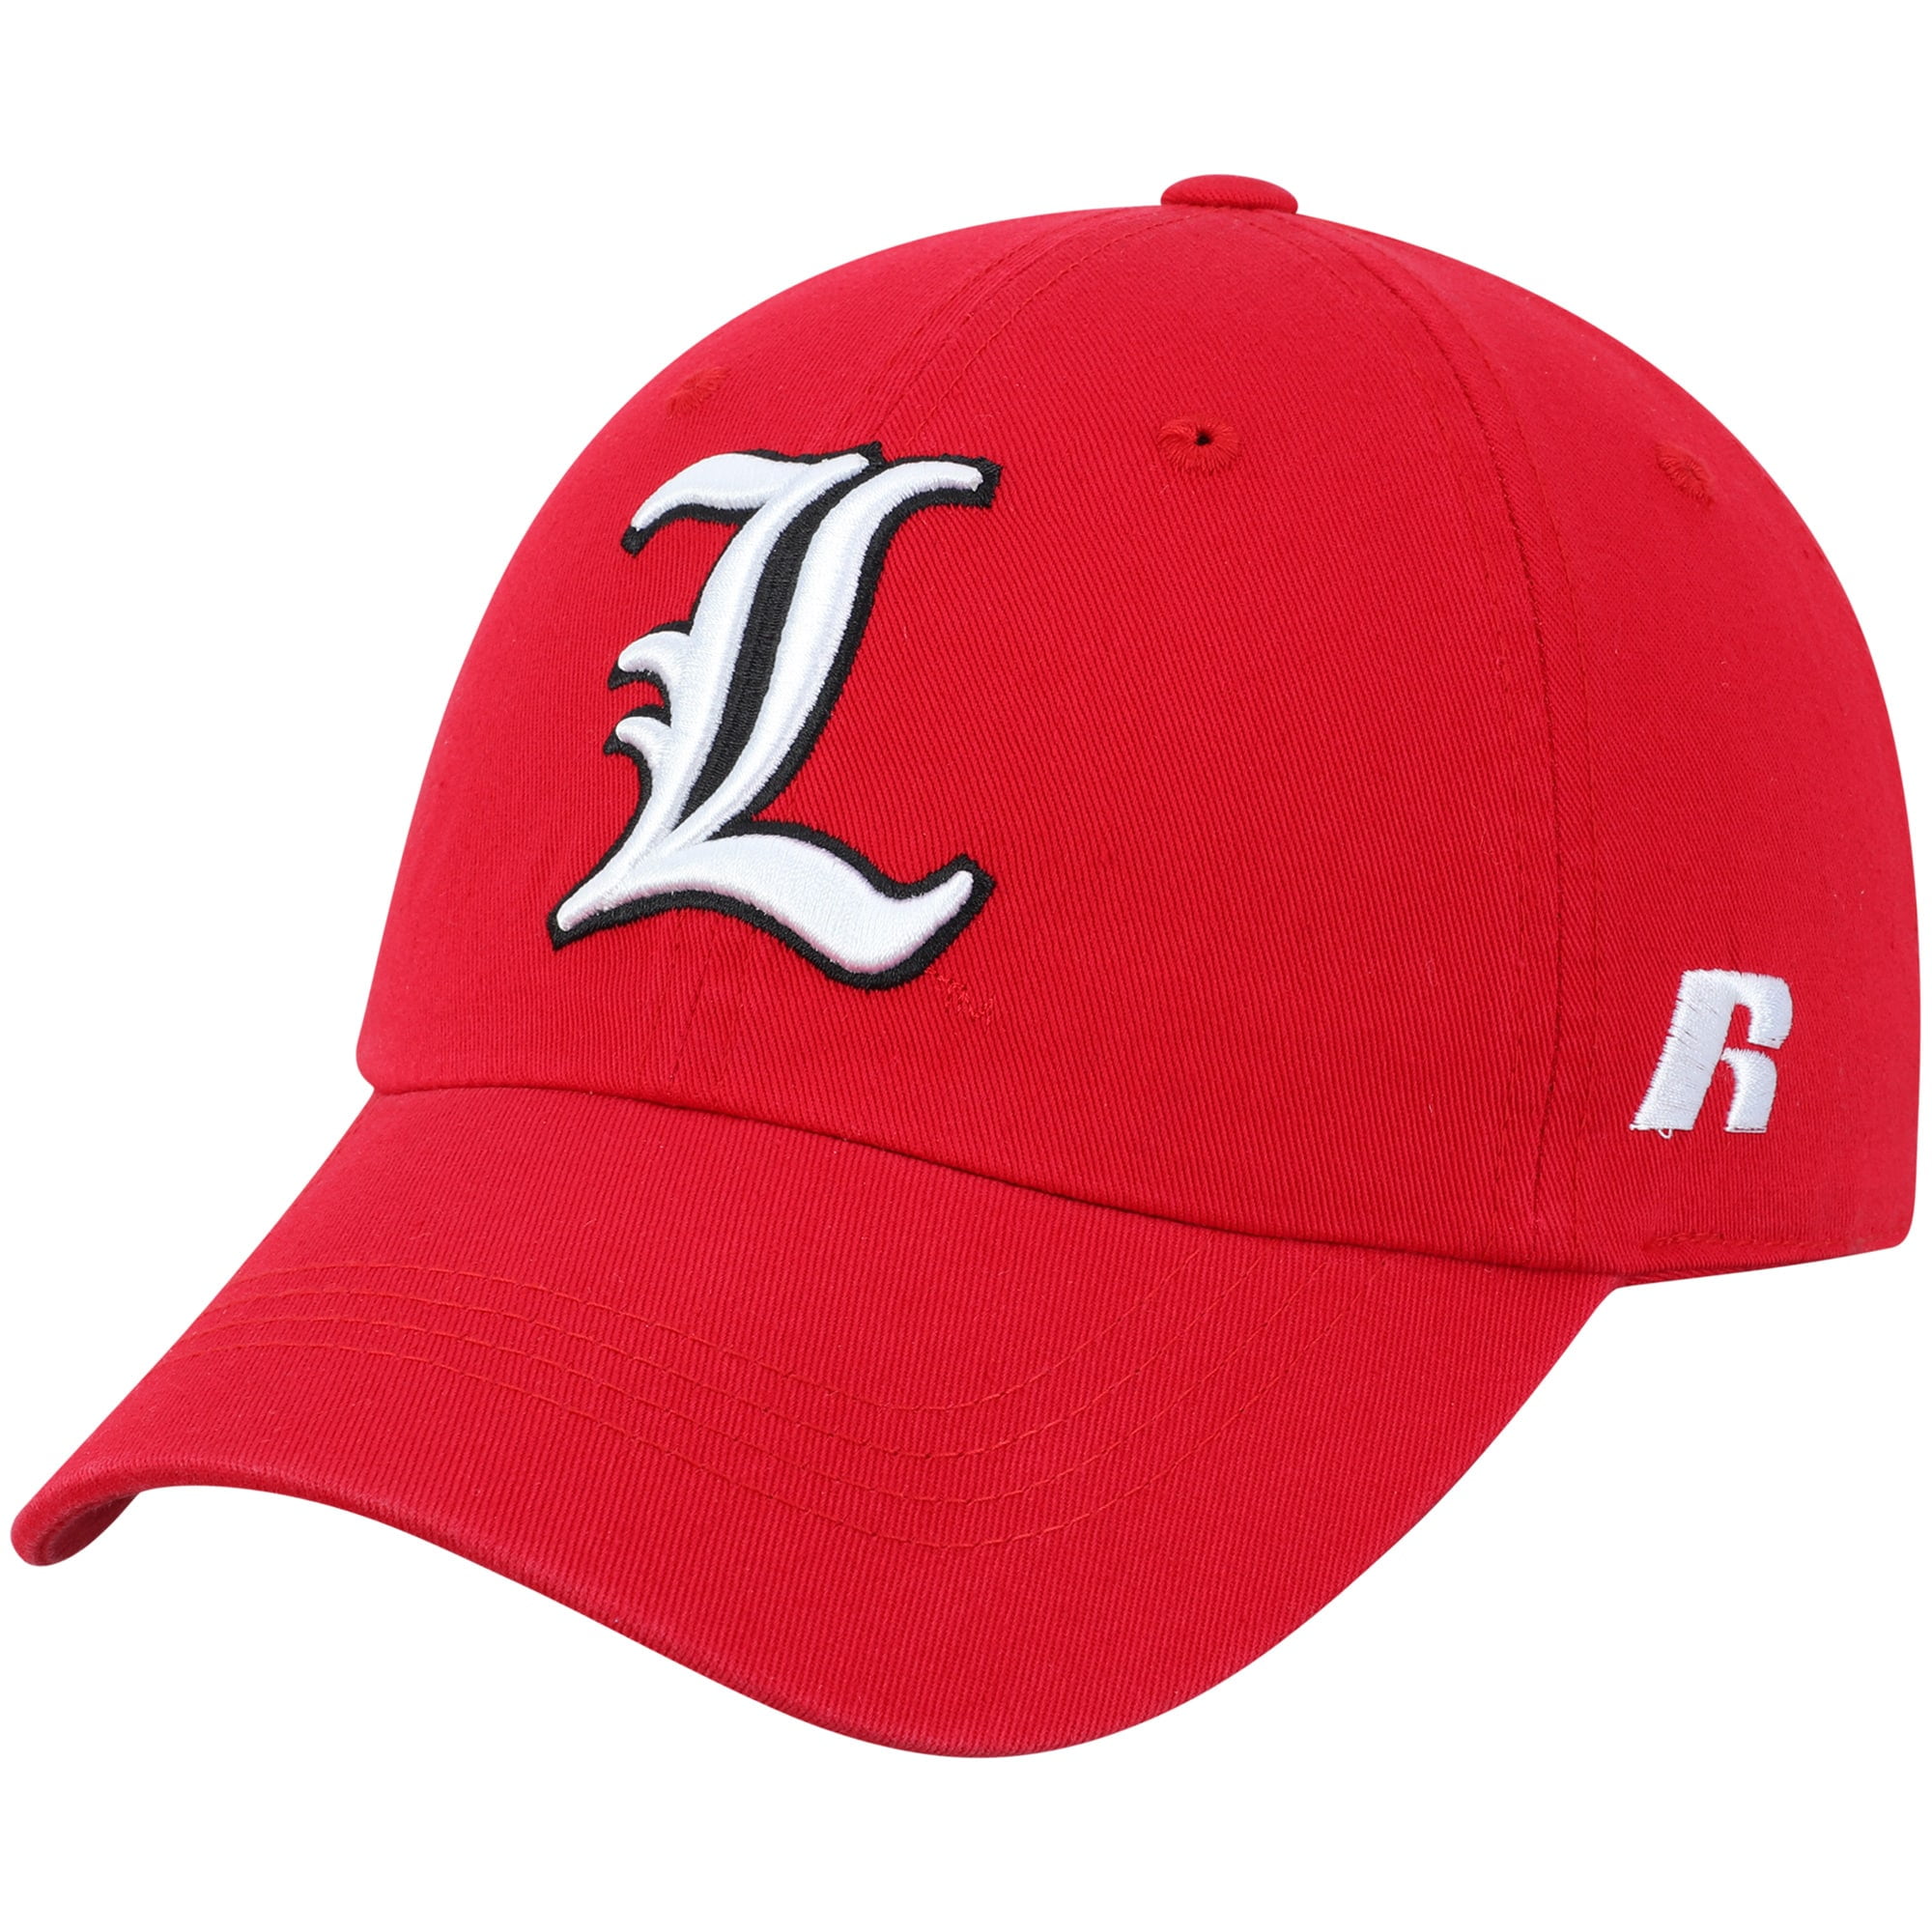 Louisville Cardinals Russell Athletic Team Color Washed Adjustable Hat -  Red - OSFA 